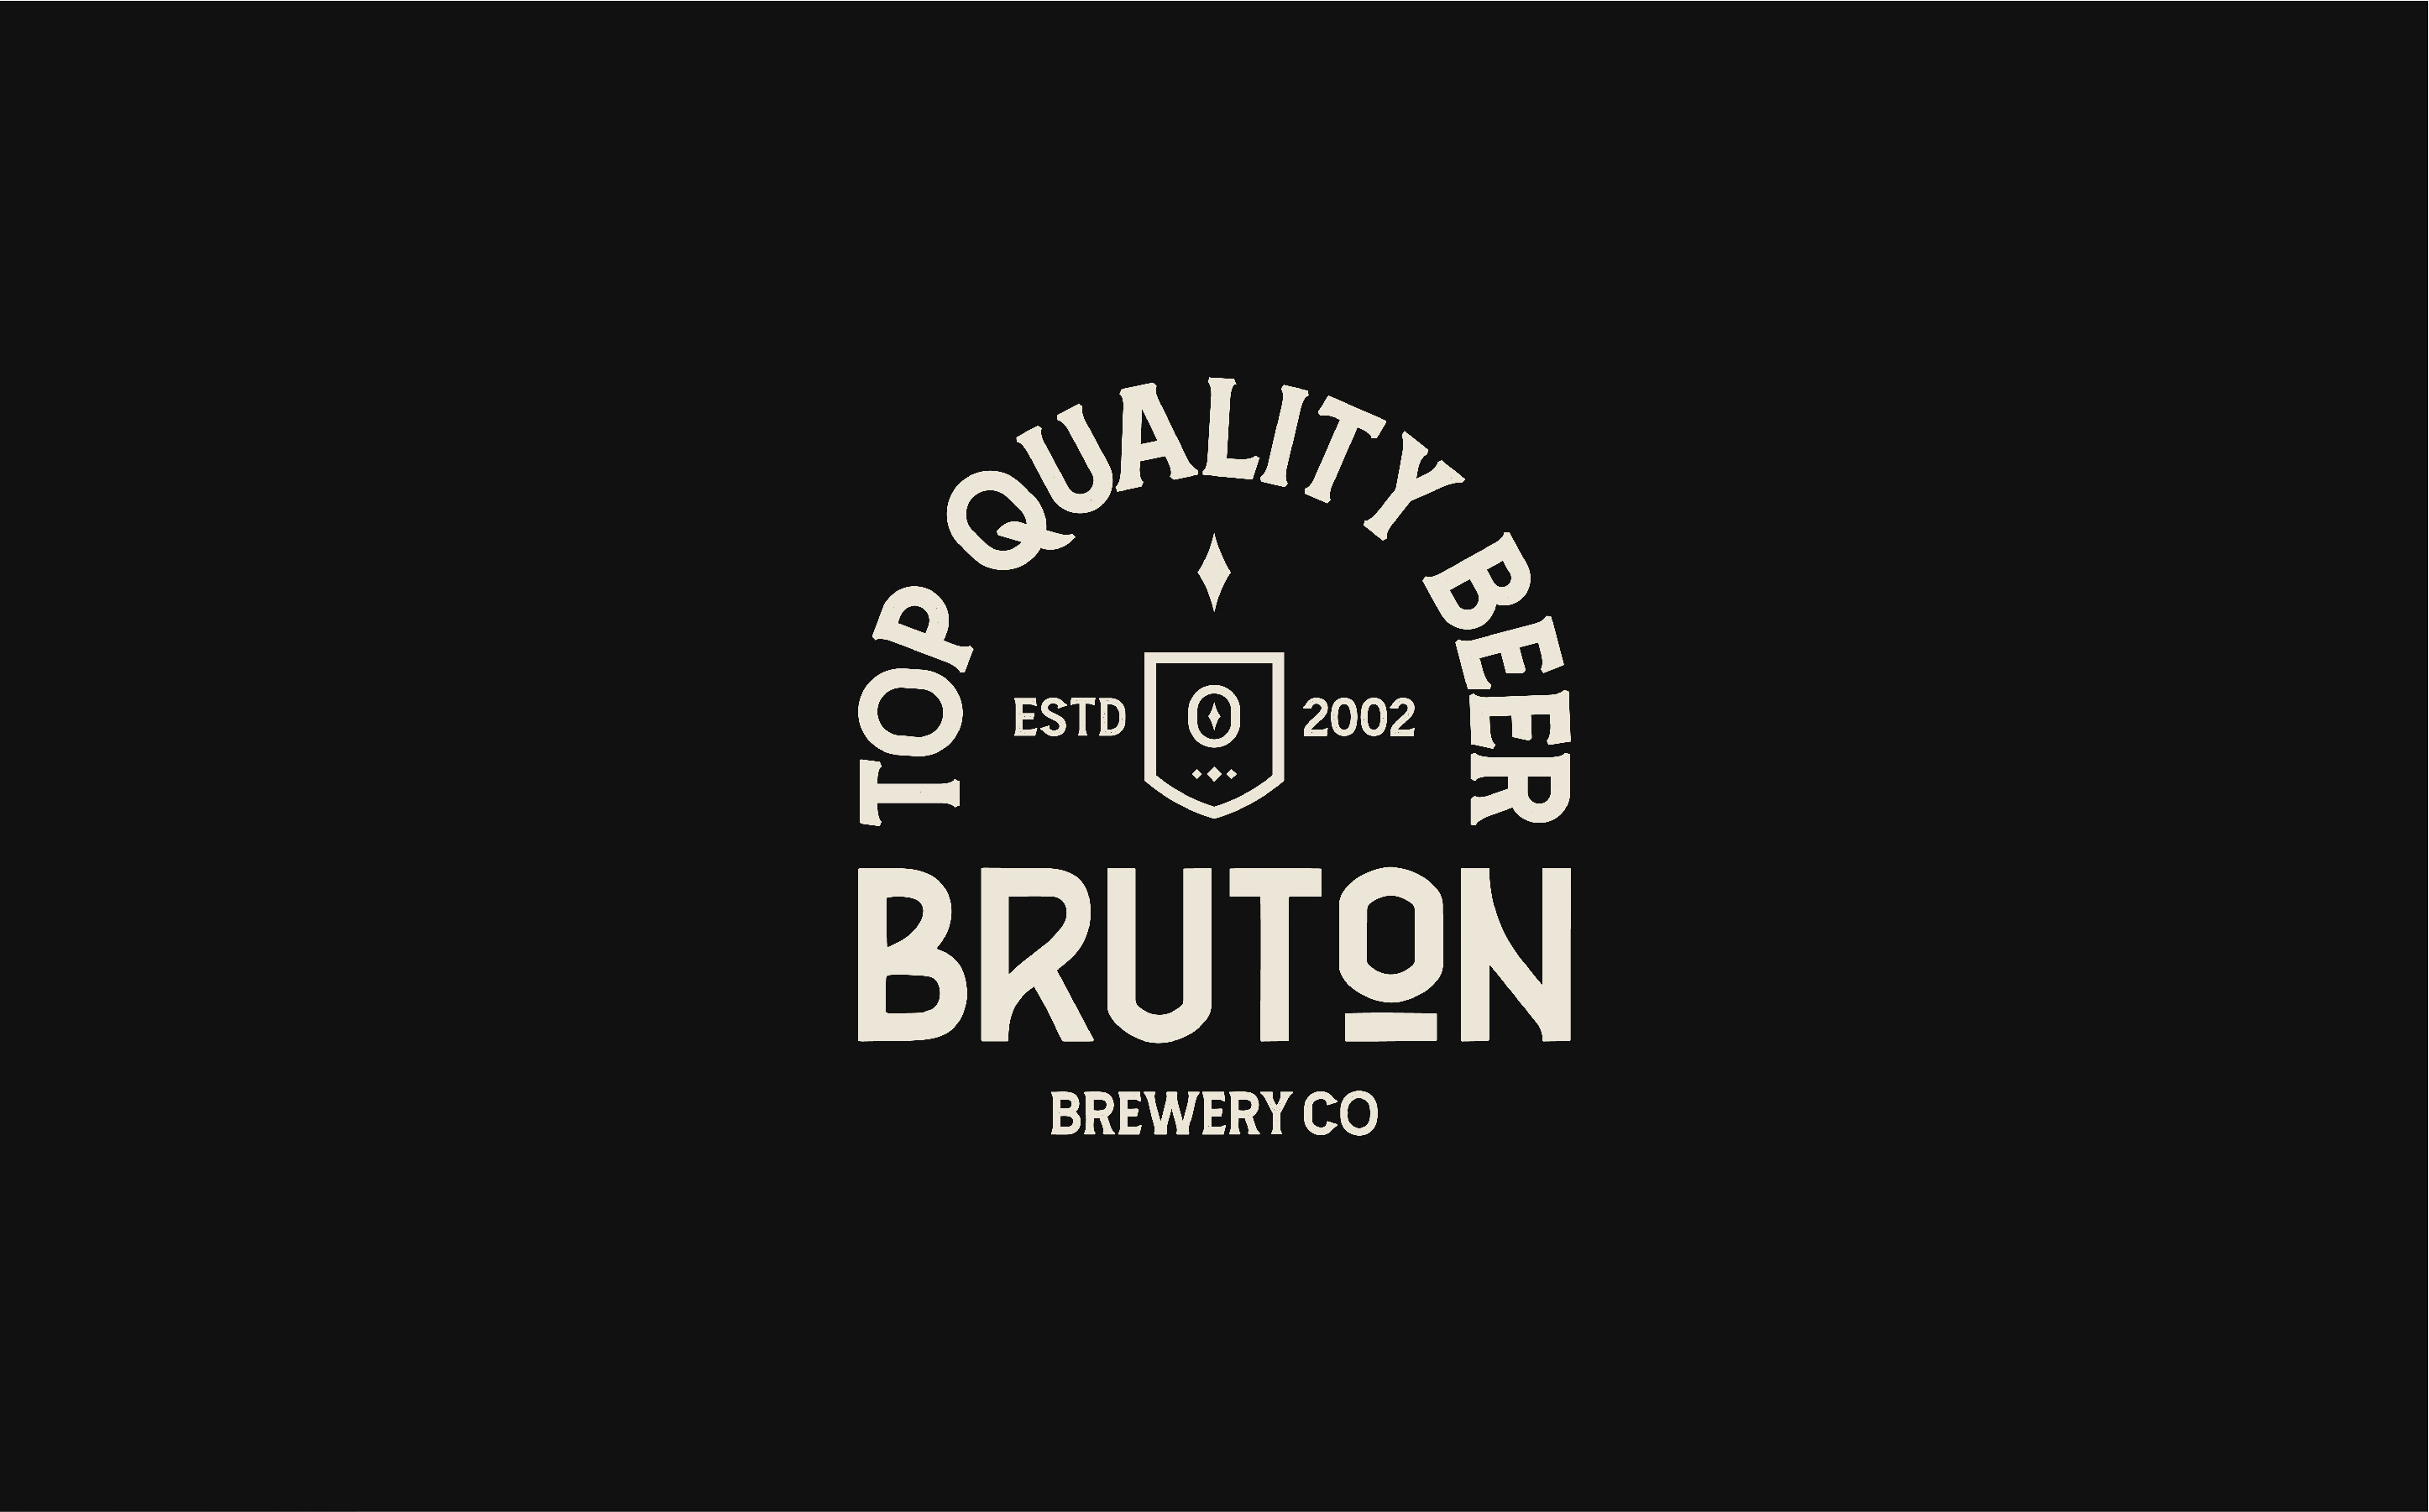 Redesigns for Bruton Beer by Zantana Design